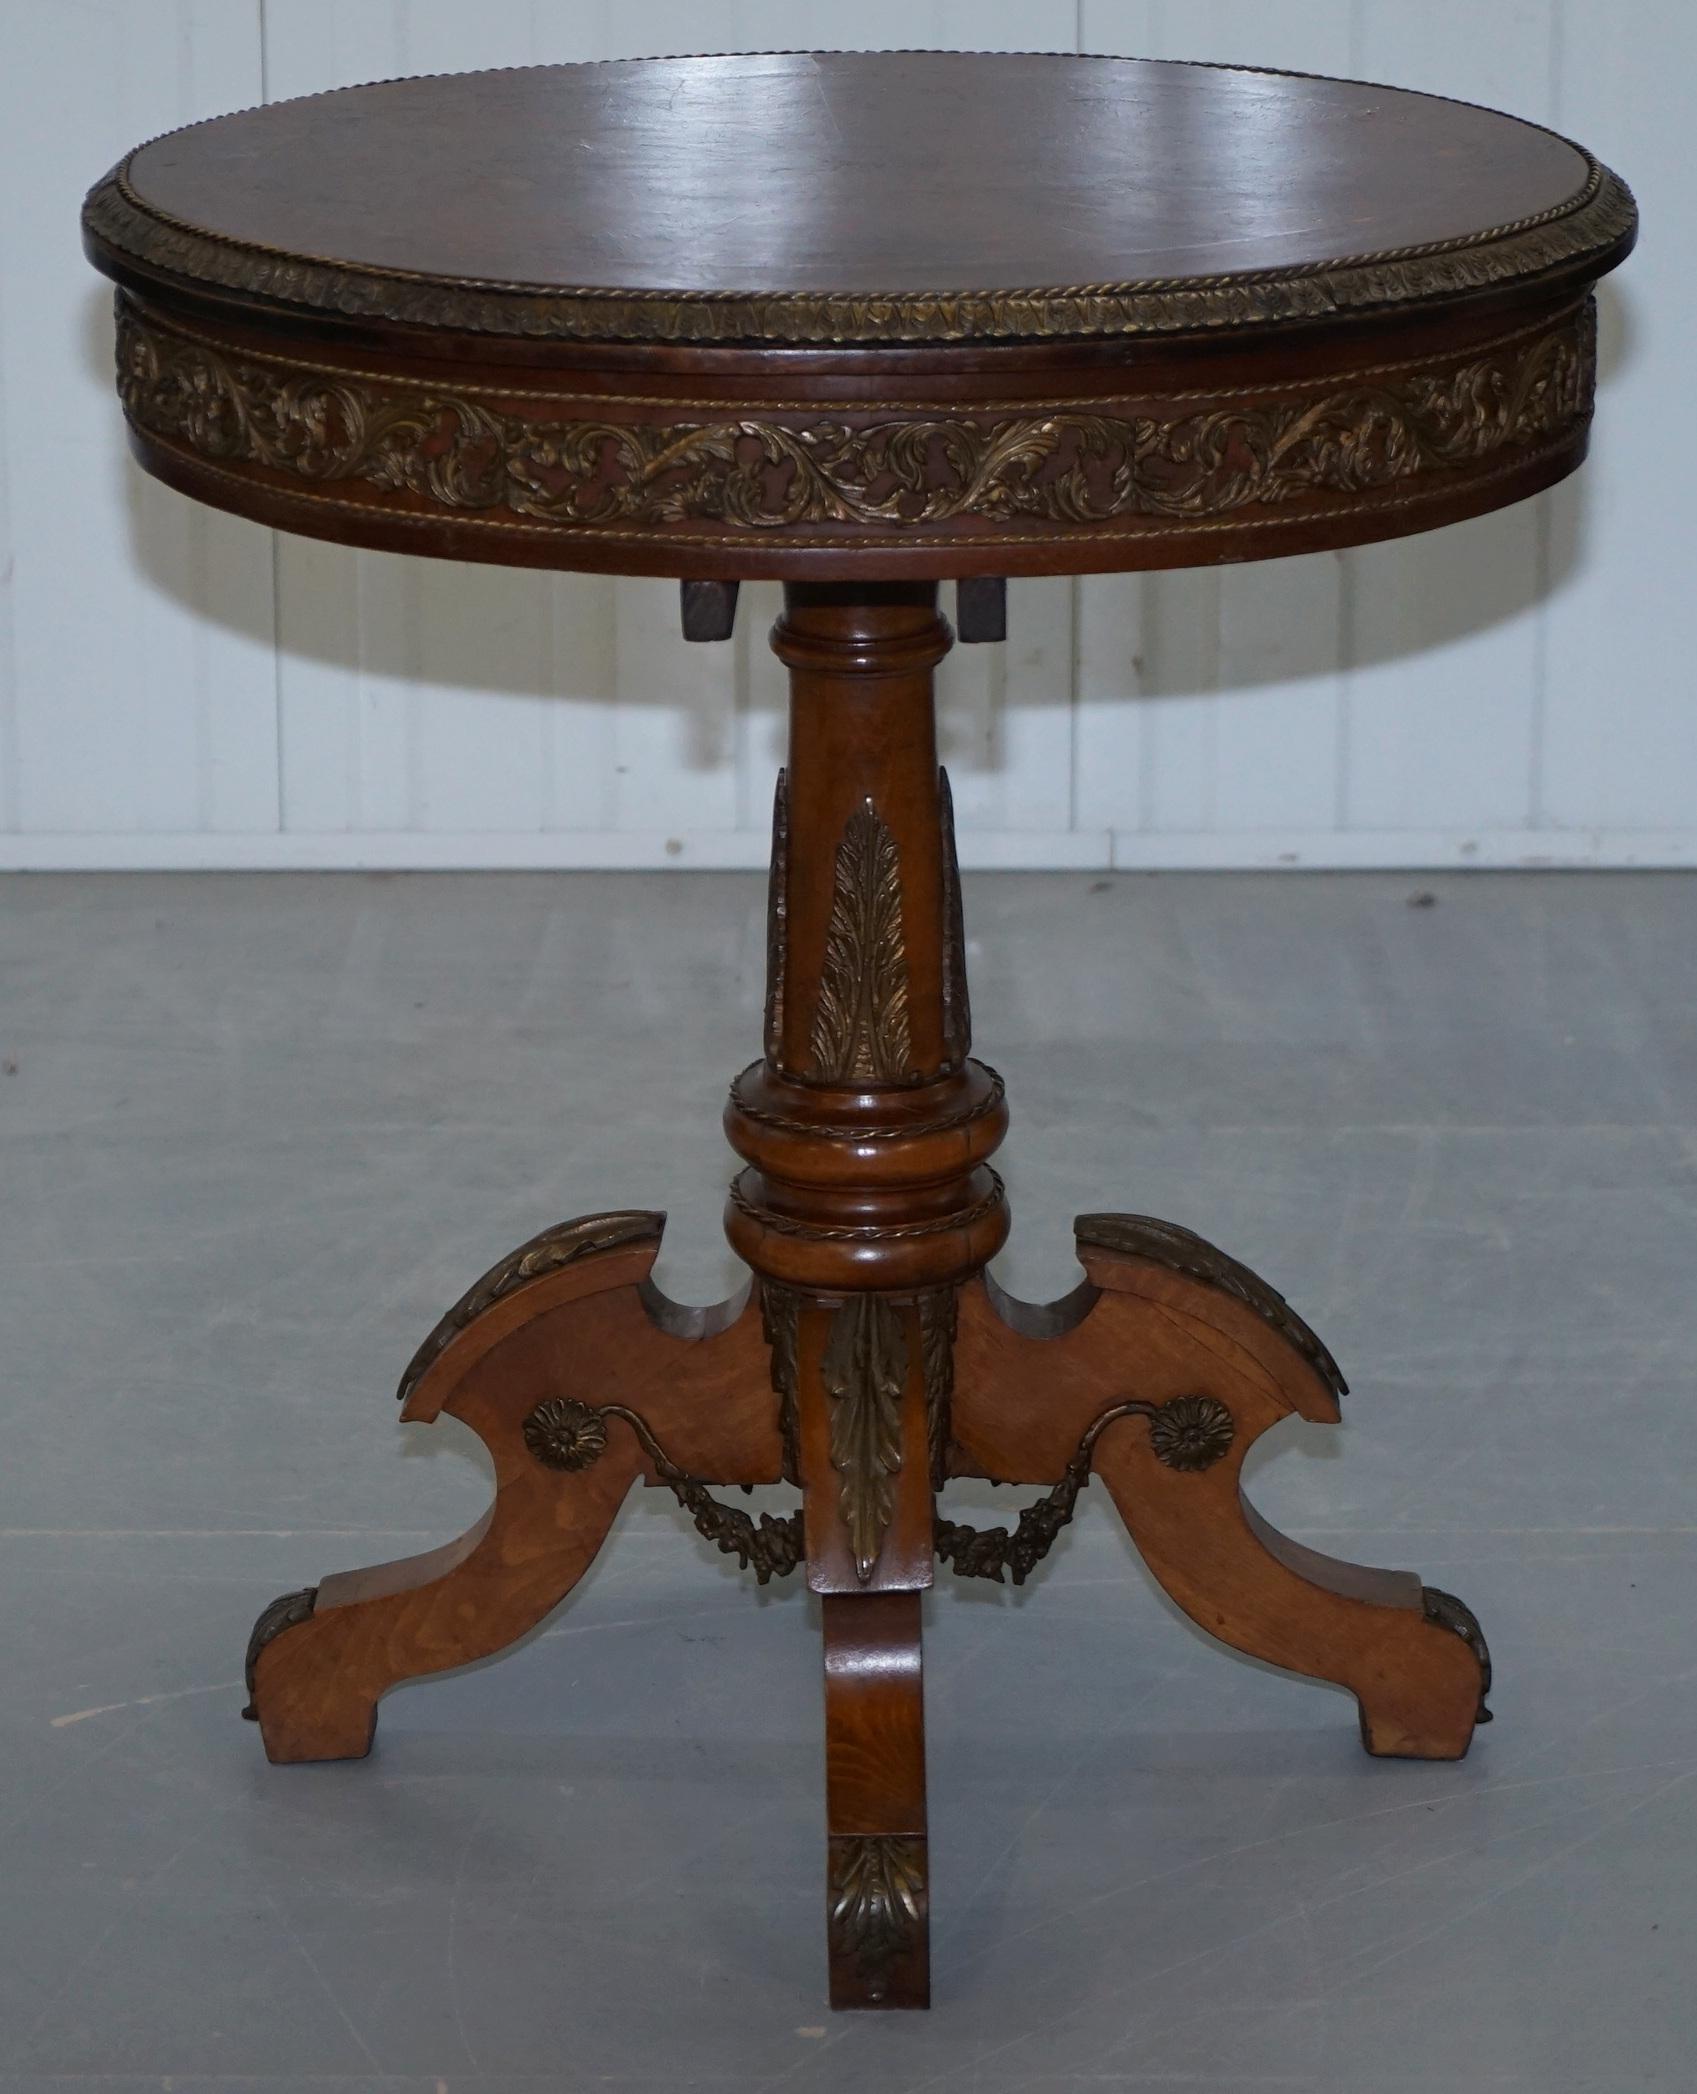 We are delighted to offer for sale this lovely walnut marquetry inlaid French side table covered in ormolu mounts all over

This table is stunning, very decorative, highly desirable, it’s a real signature piece which grabs attention from every